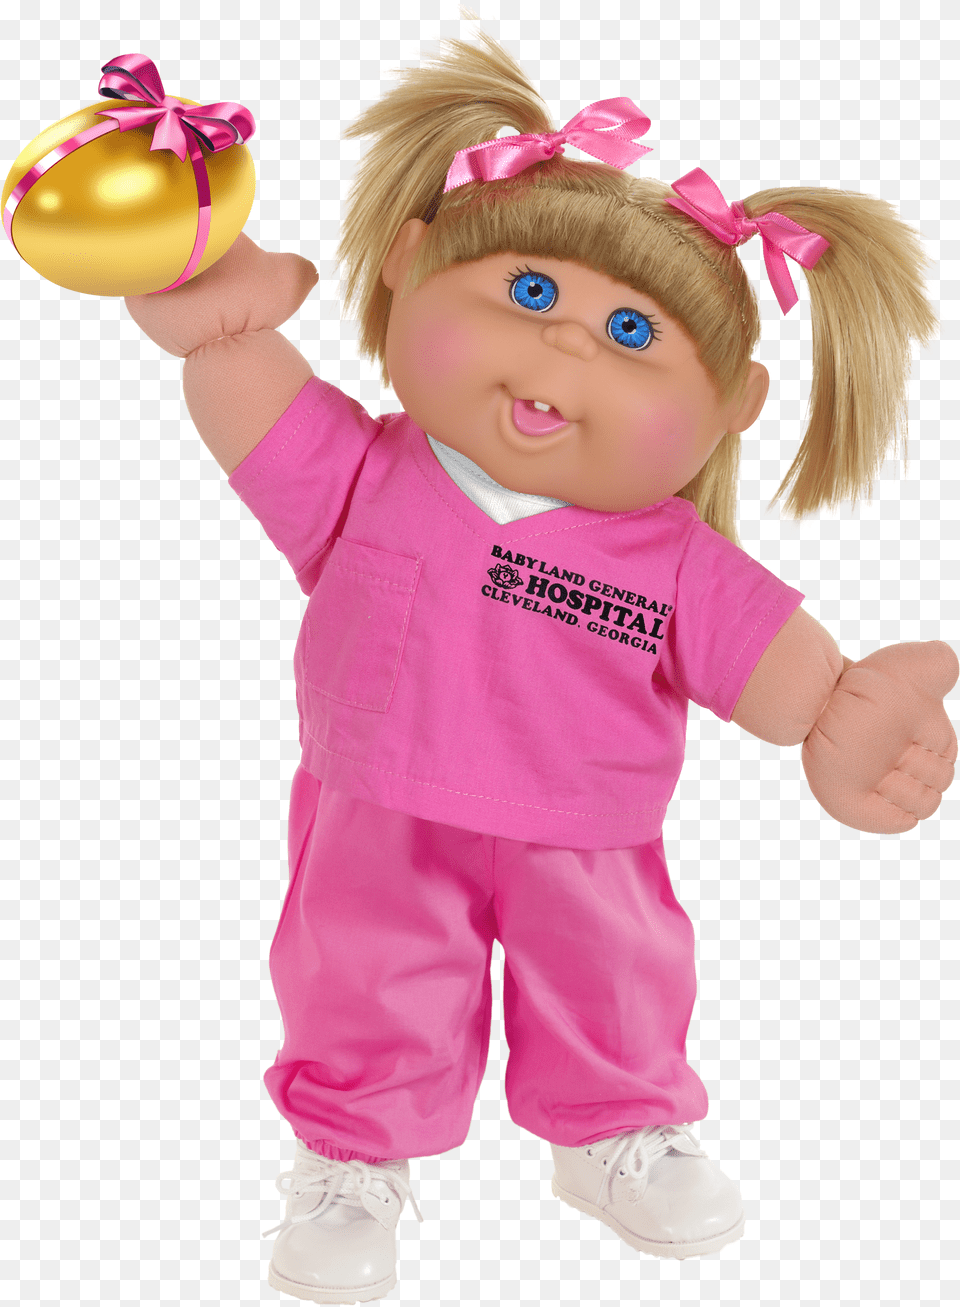 Find The Golden Egg At The Cabbage Patch Kids Magical Cabbage Patch Kids, Doll, Toy, Baby, Person Free Transparent Png